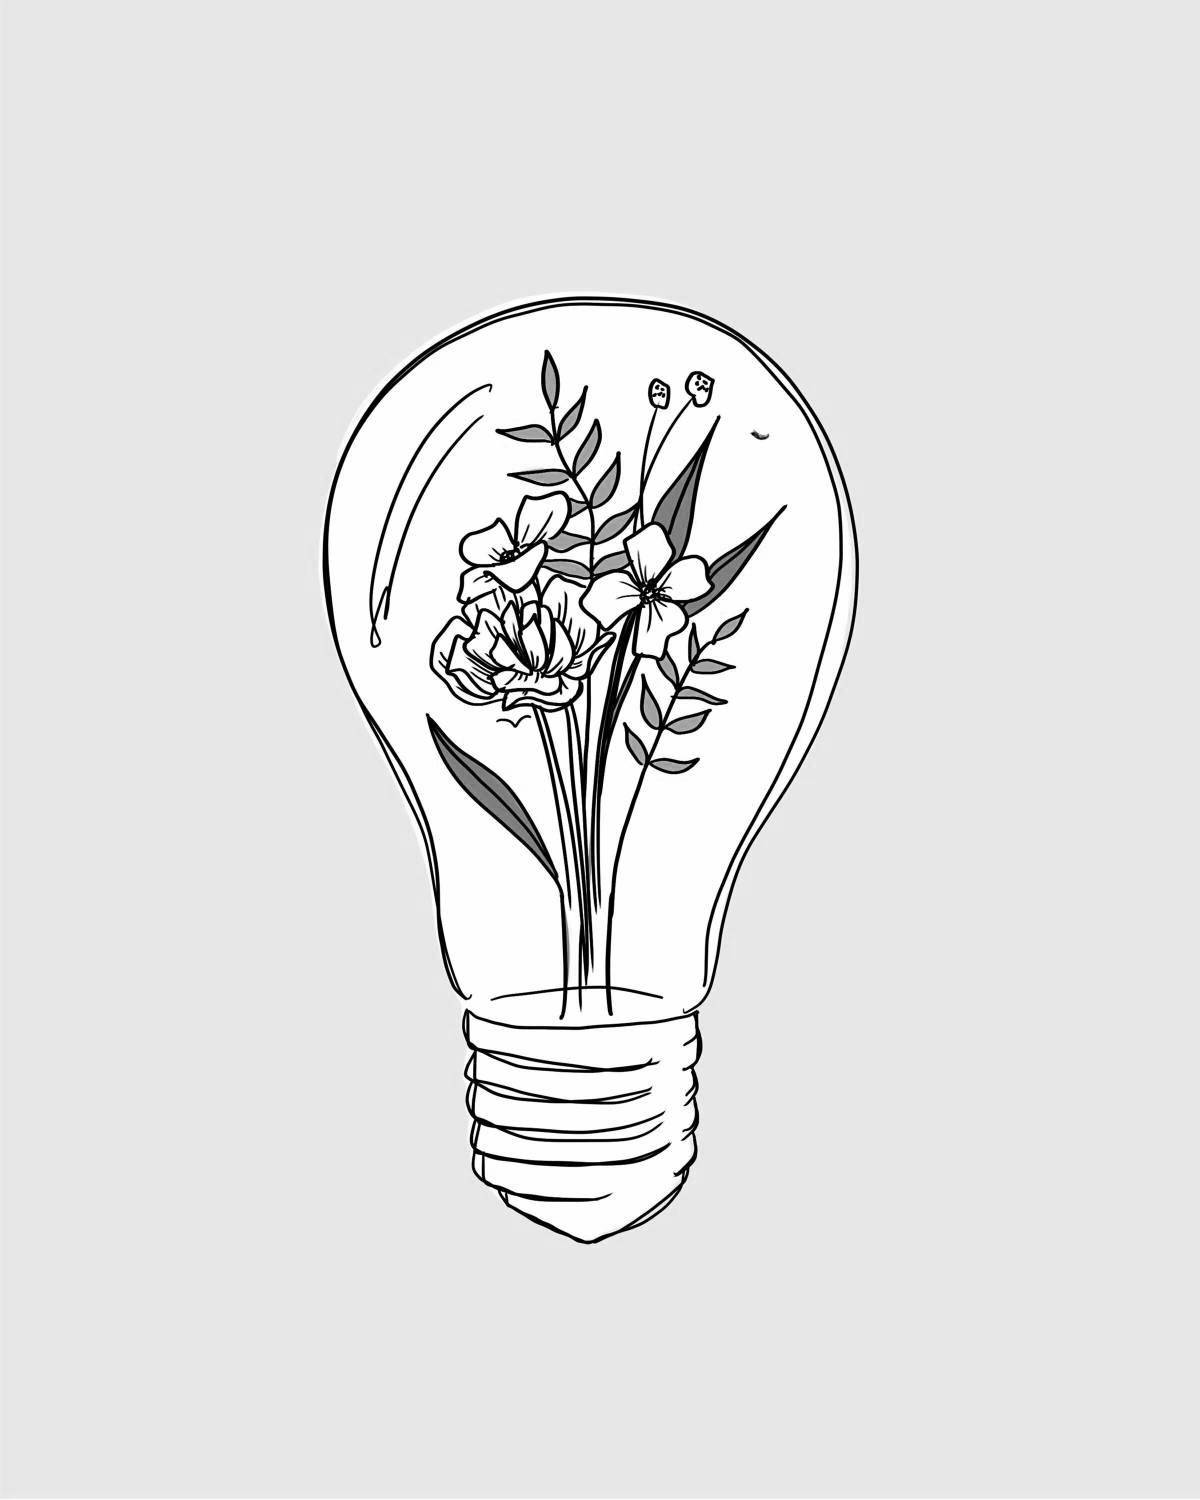 Animated coloring page of light aesthetics